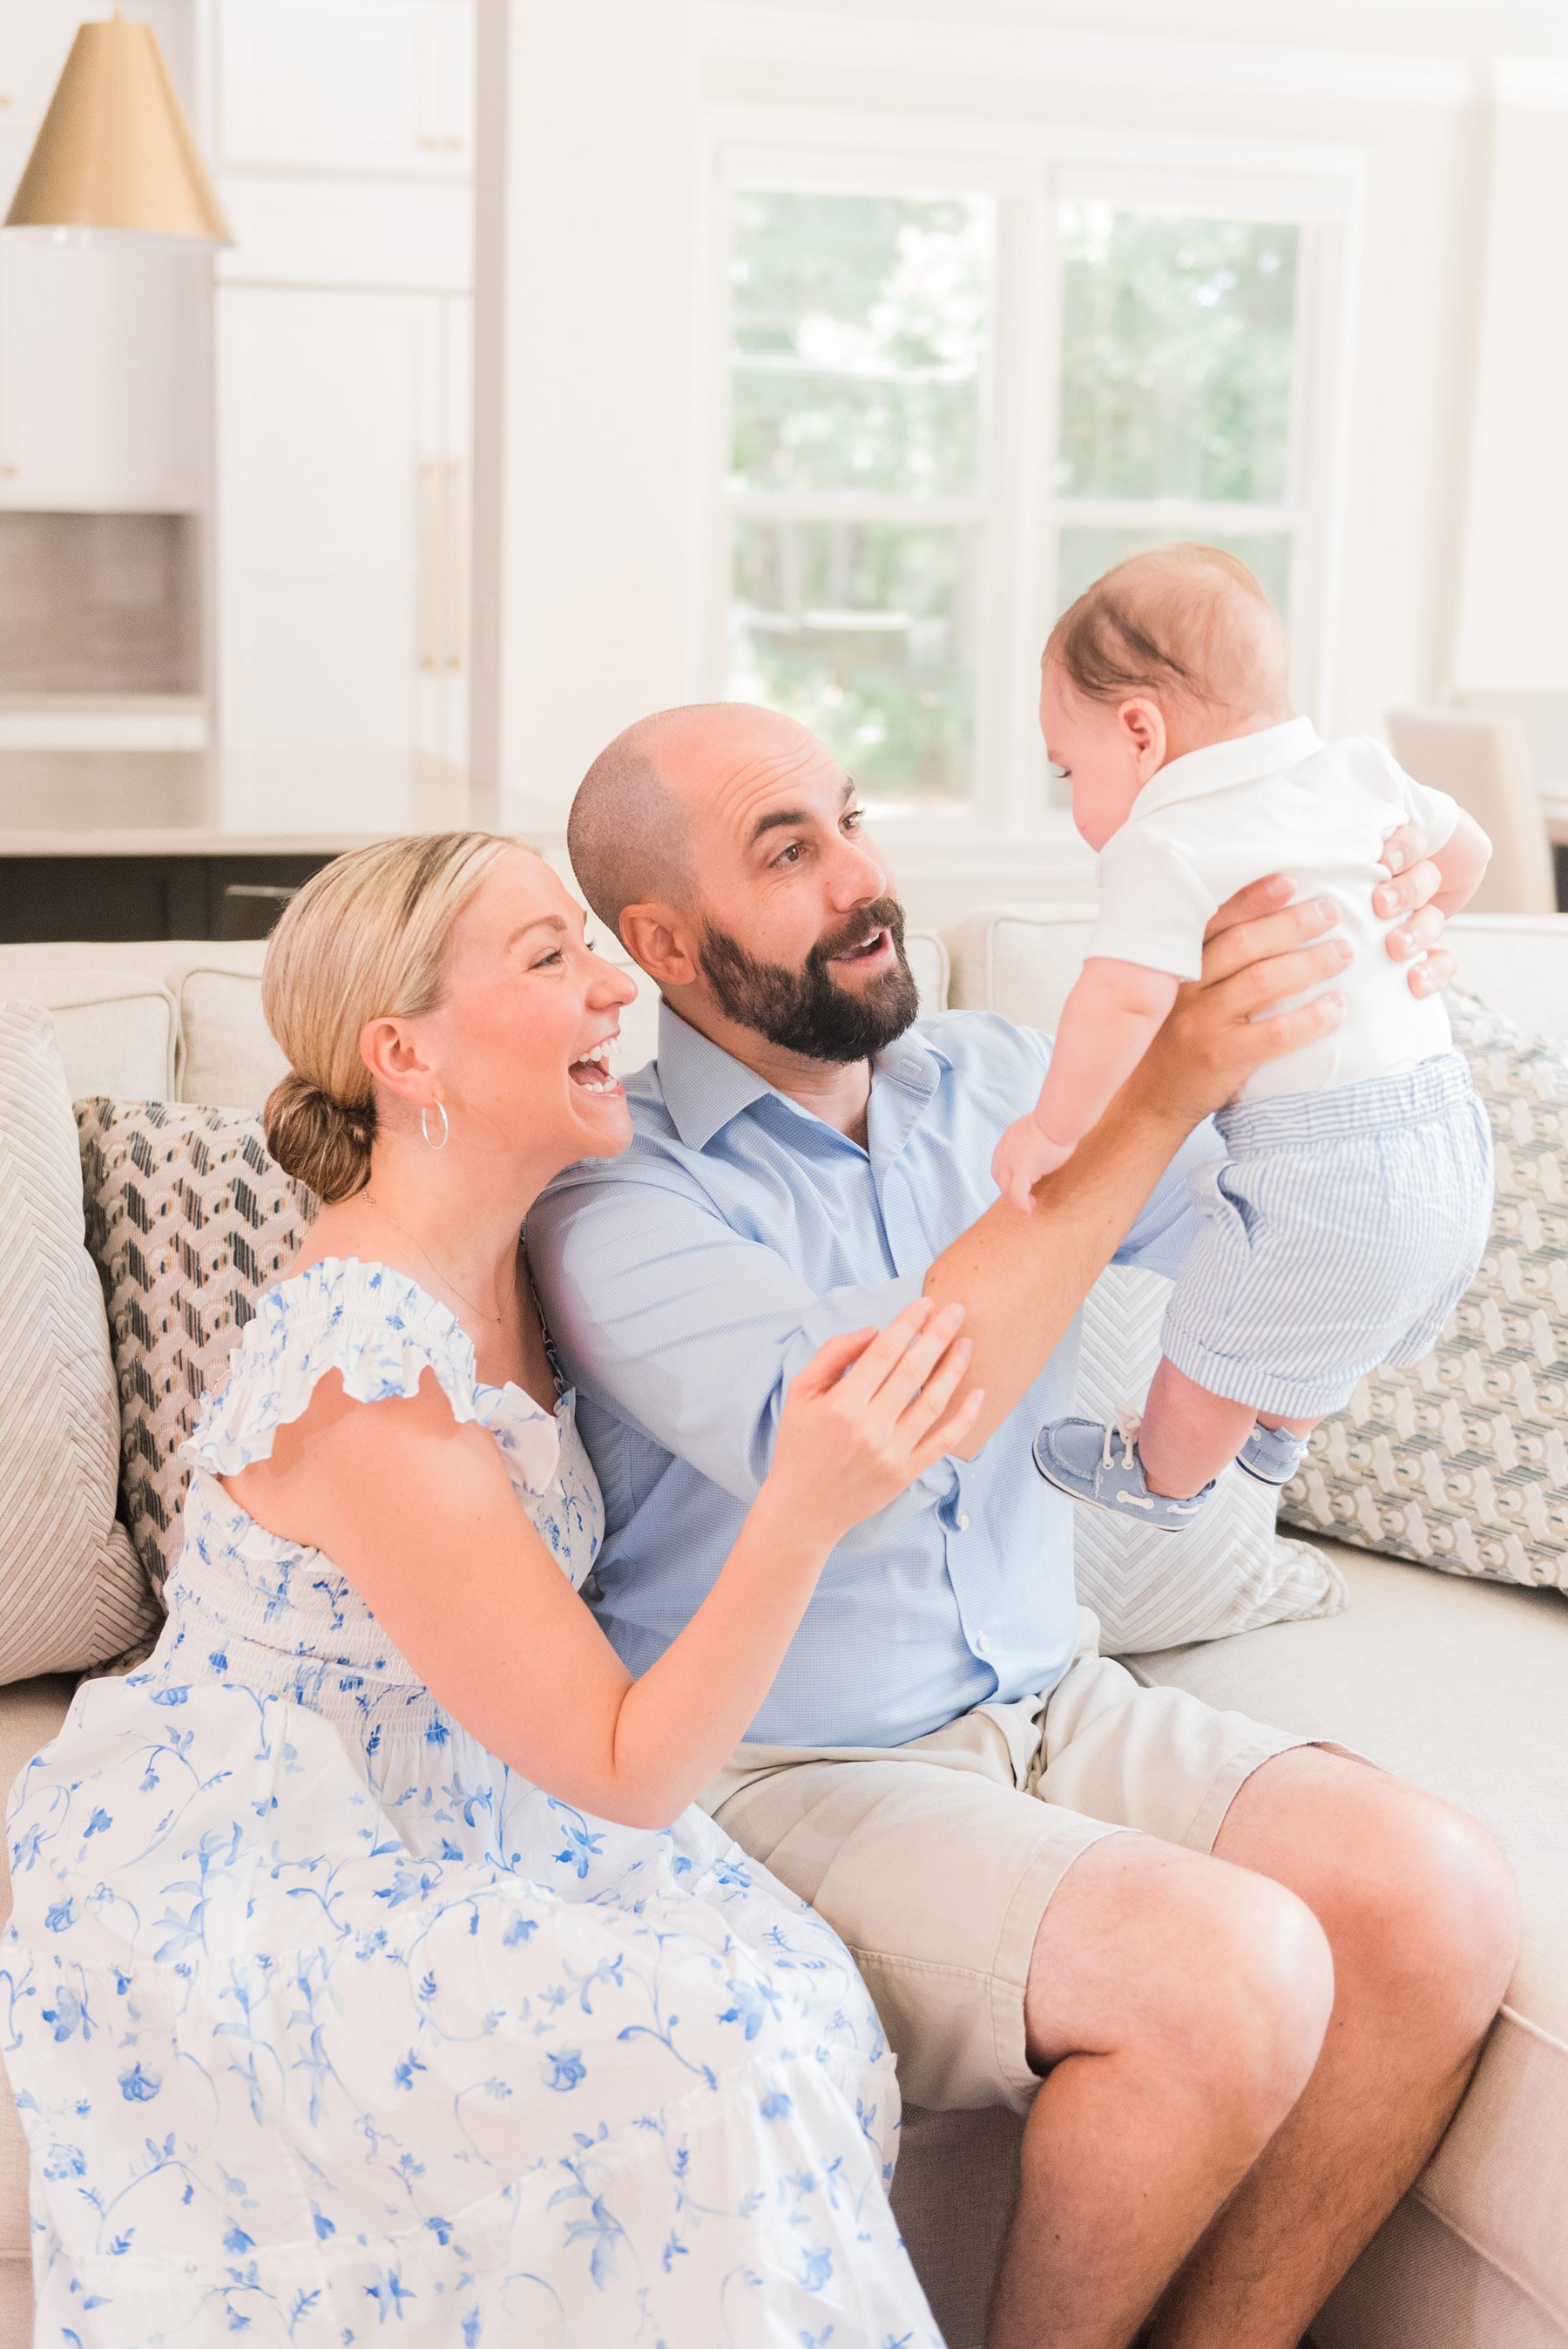  Jacquie Erickson photography takes the time to get to know her clients a bit before each session so she can make the photos unique to each client. #inhomeportraitsessions #familyphotos #portraitphotography #atlantaphotographer #jacquieerickson #faye